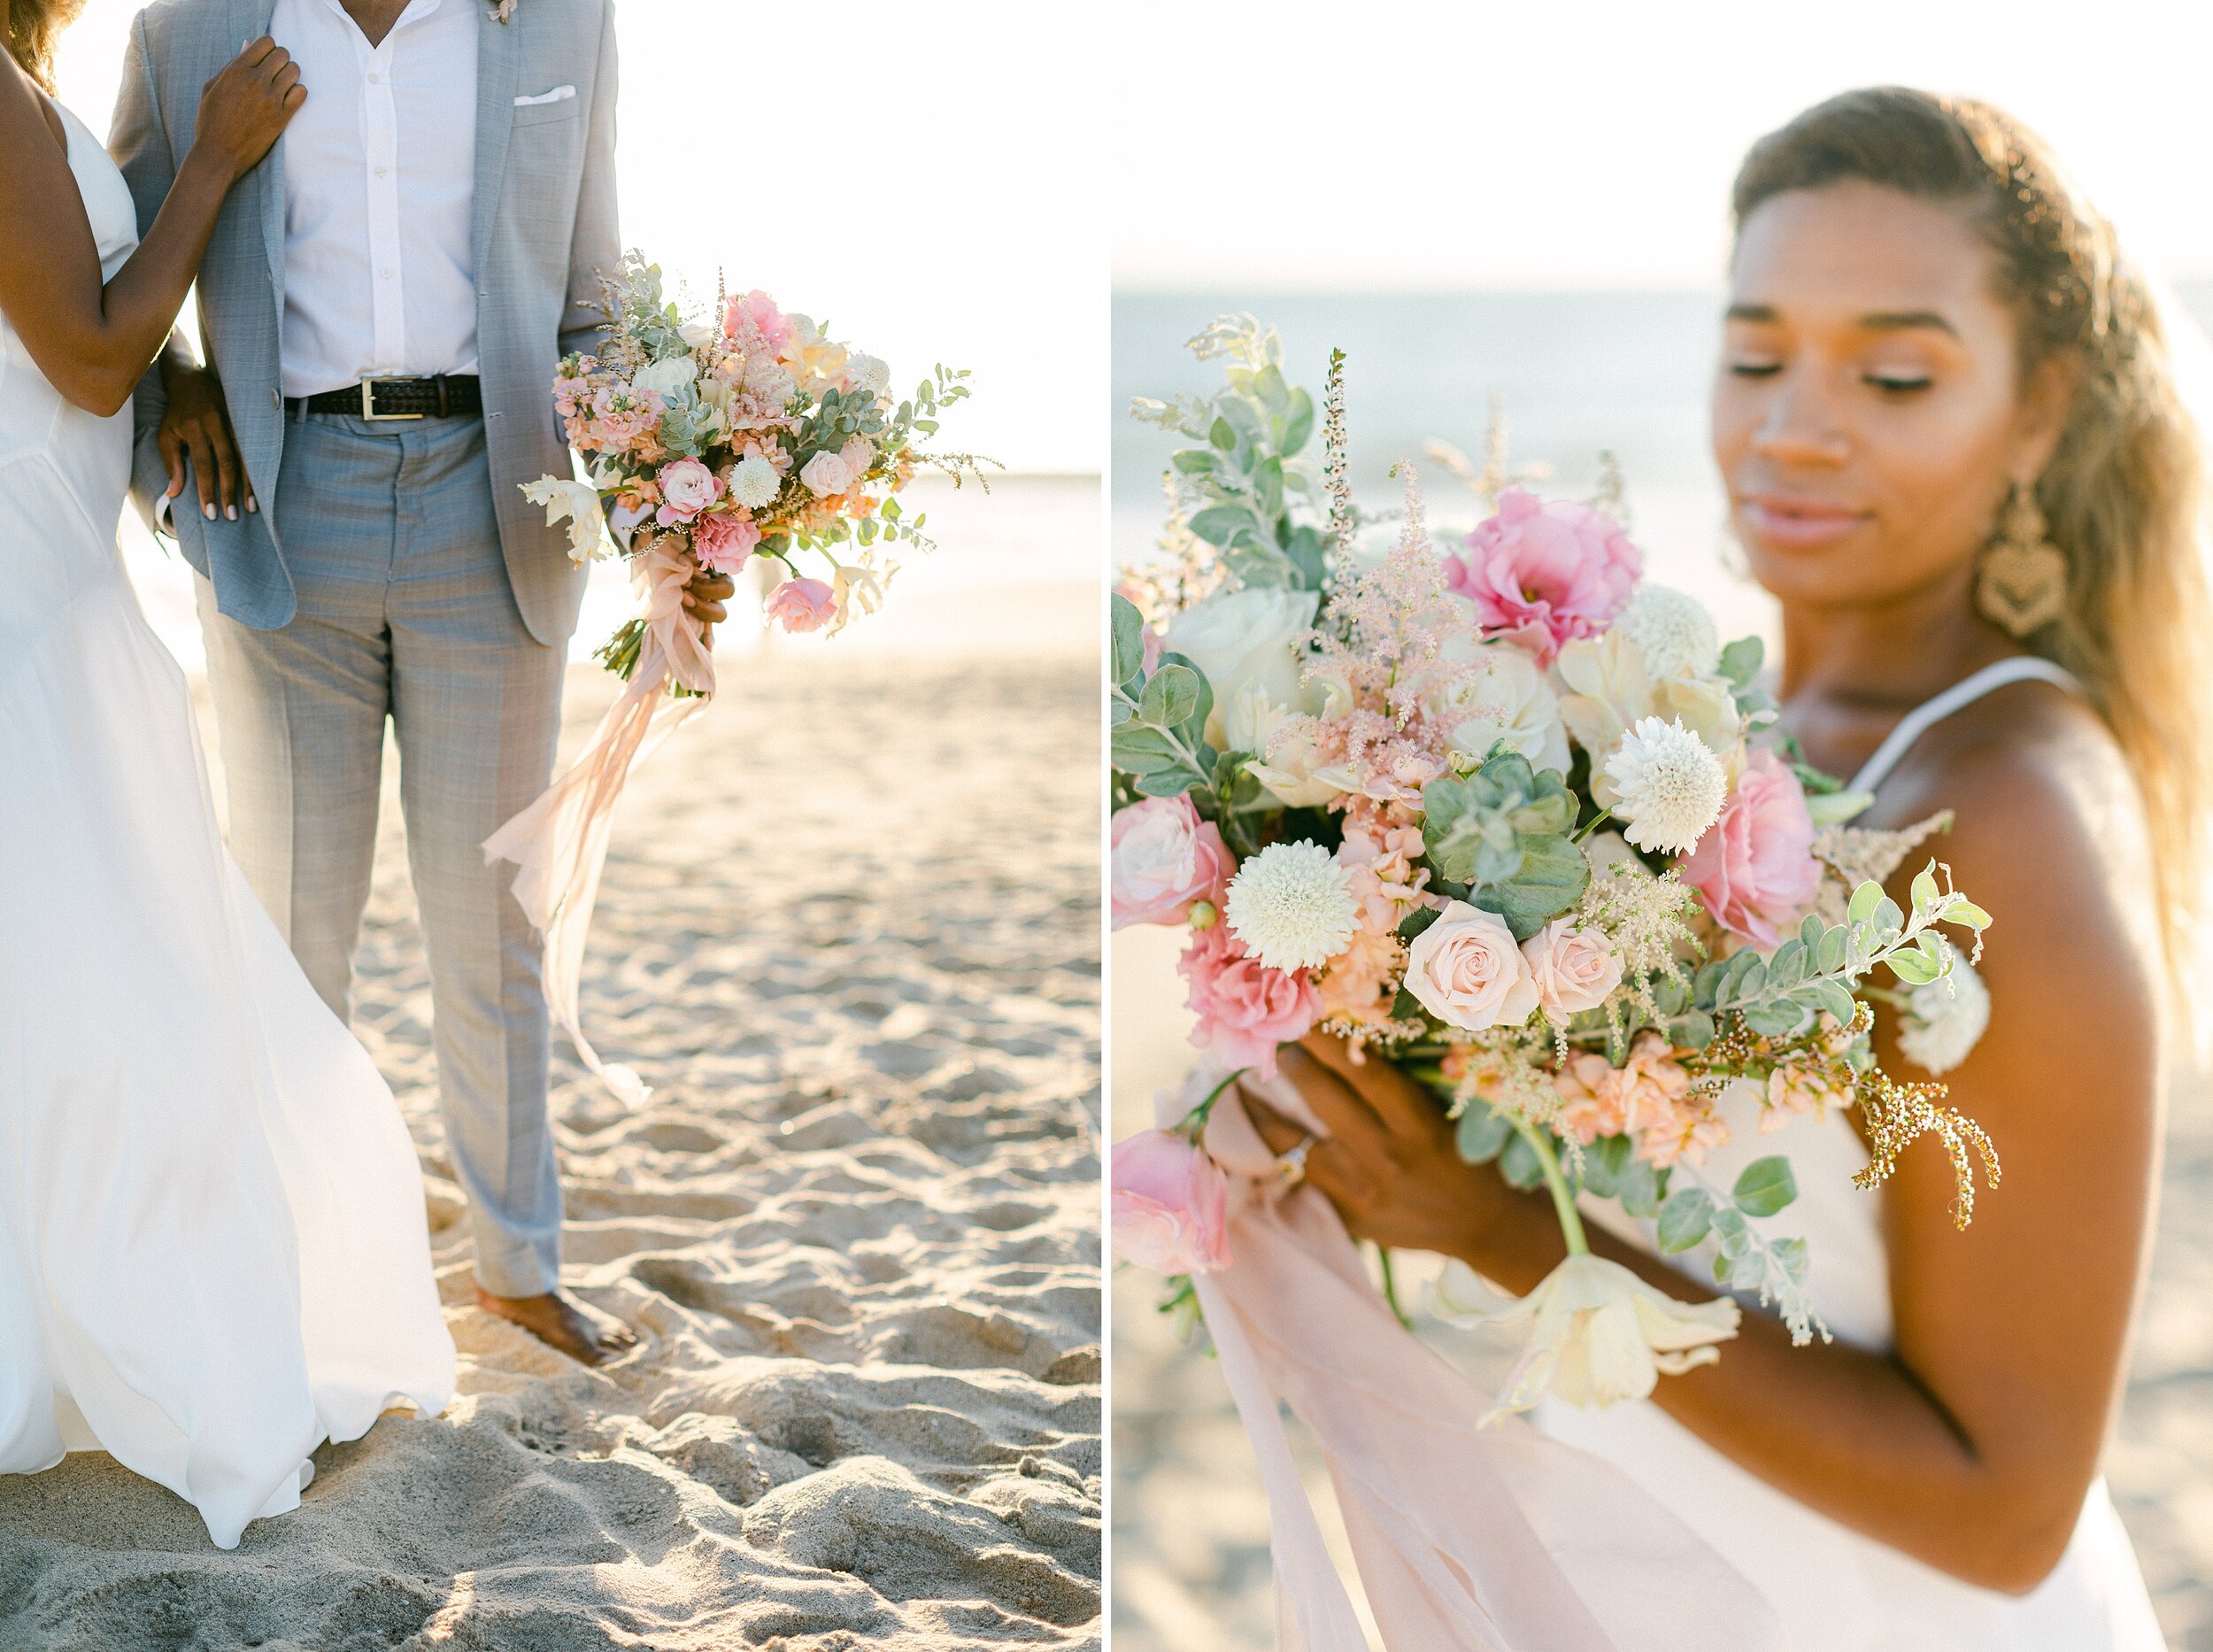 Detail and close up shots of this white, pink and lush bouquet created for an intimate beachside elopement.